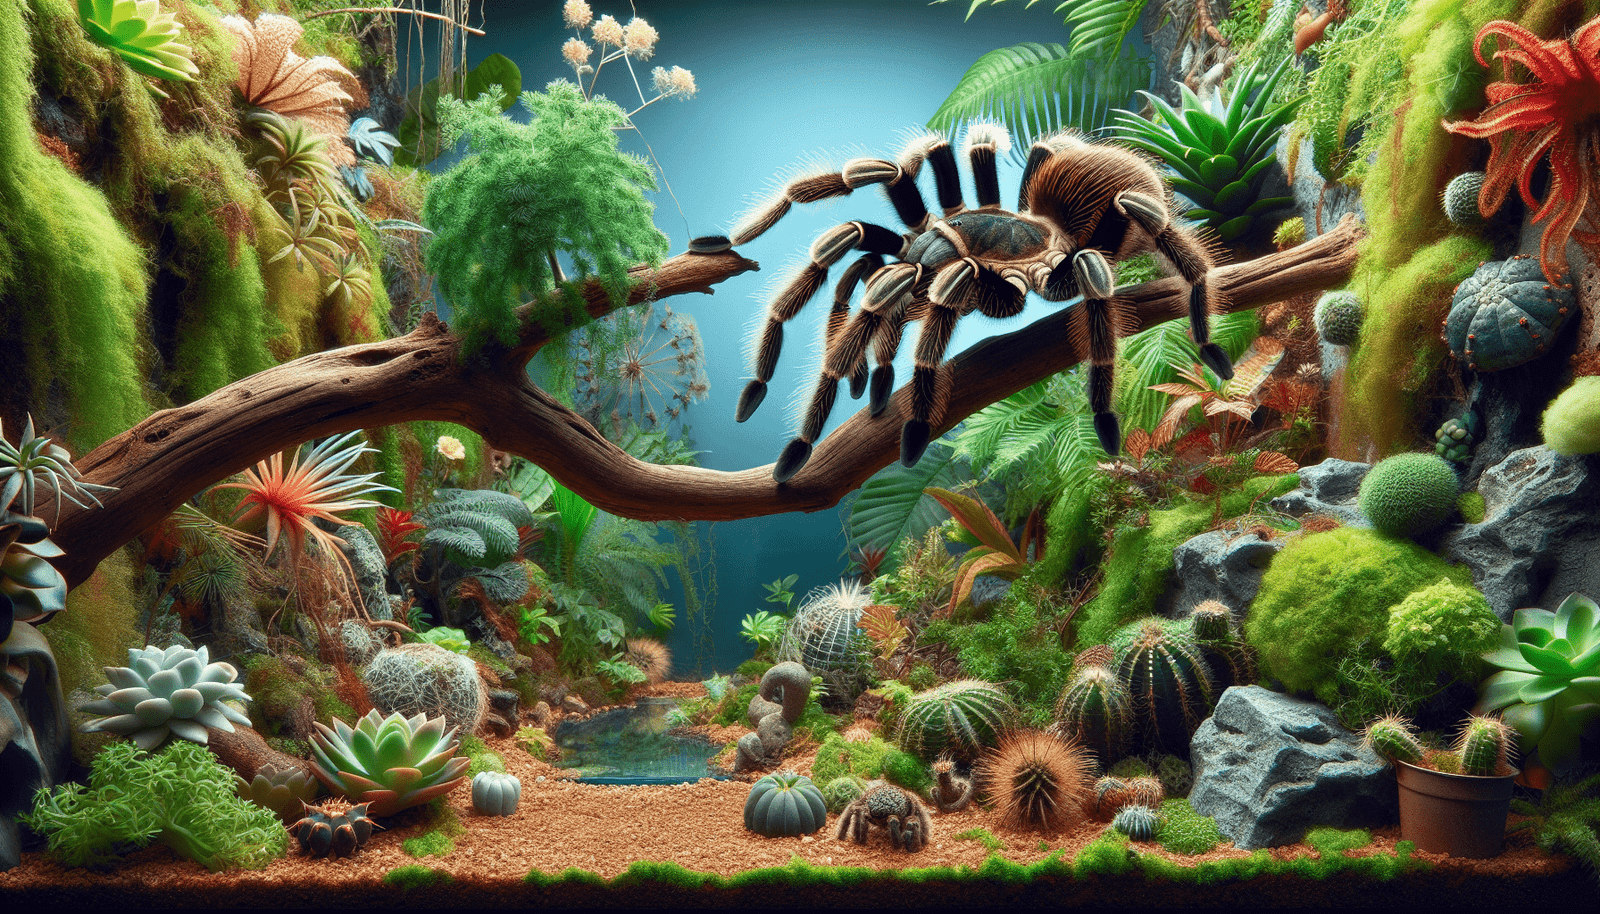 Can Tarantulas Be Kept In Enclosures With Artificial Backgrounds?